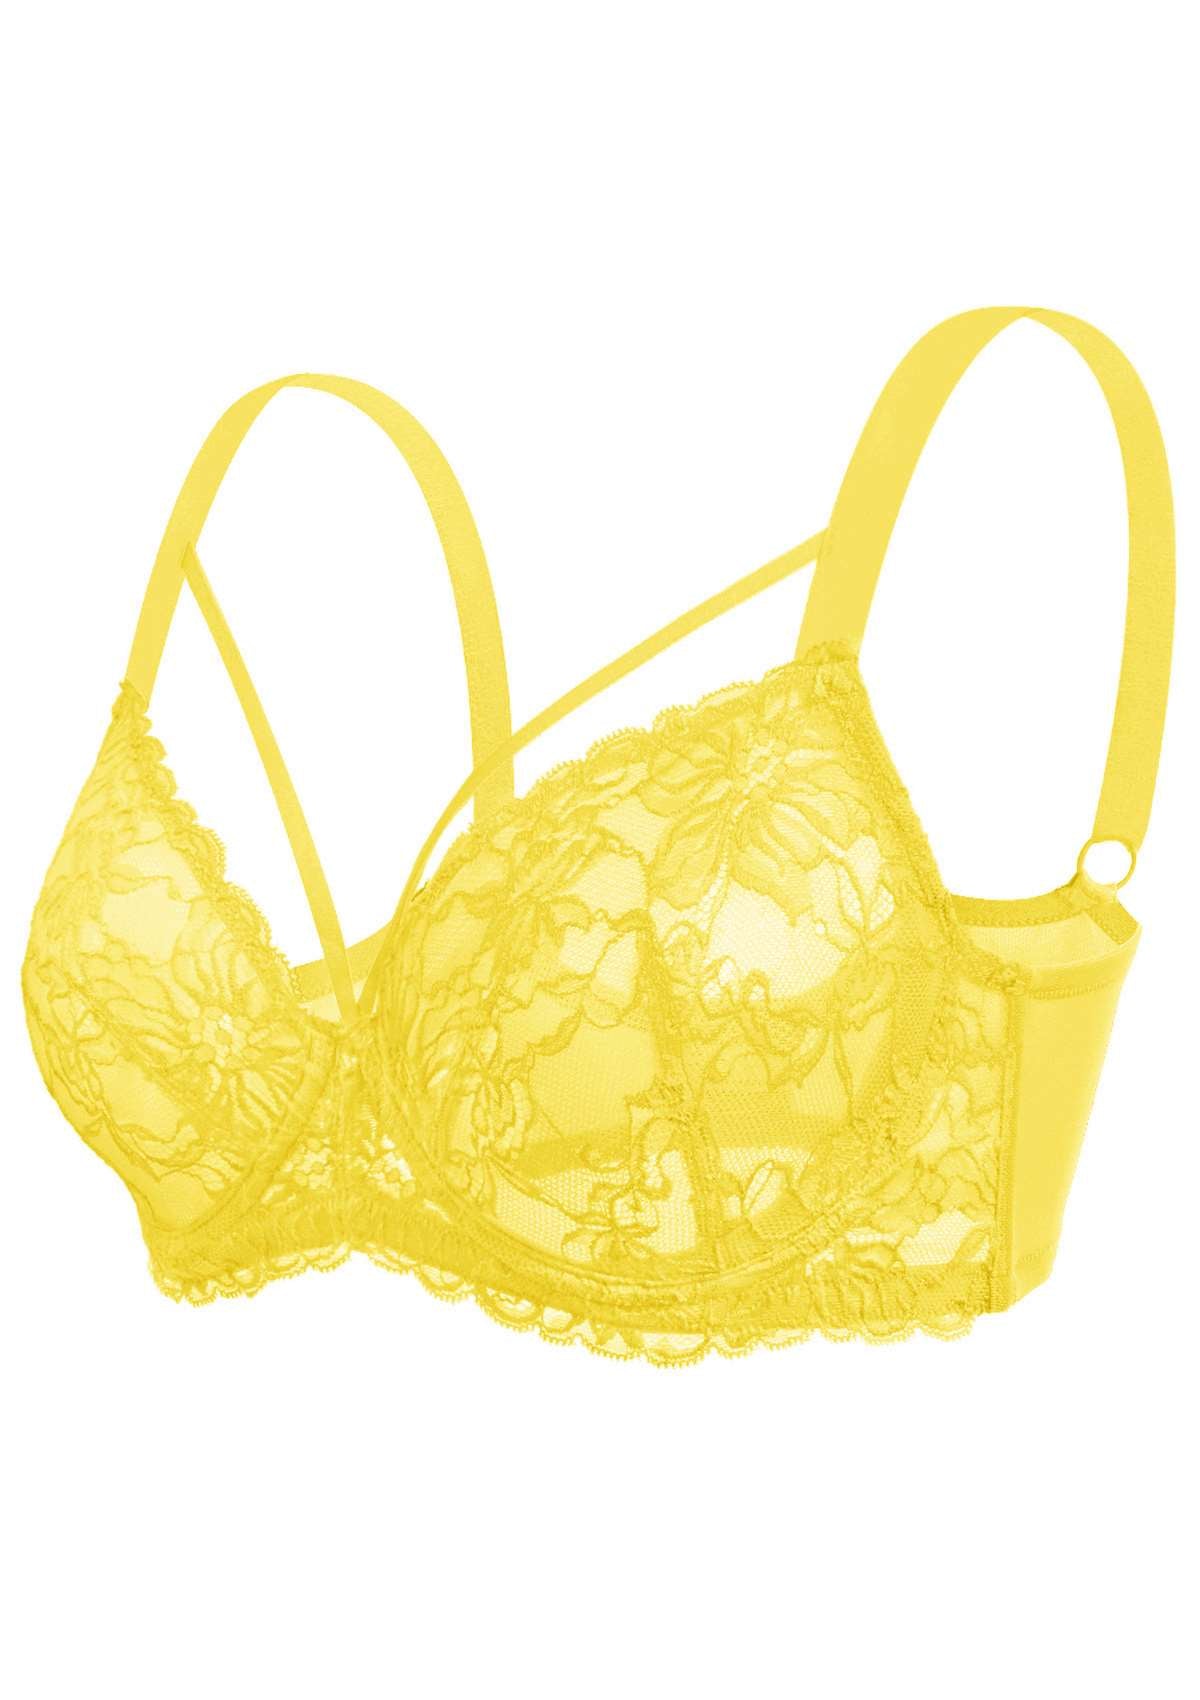 HSIA Unlined Lace Mesh Minimizer Bra For Large Breasts, Full Coverage - Bright Yellow / 36 / G